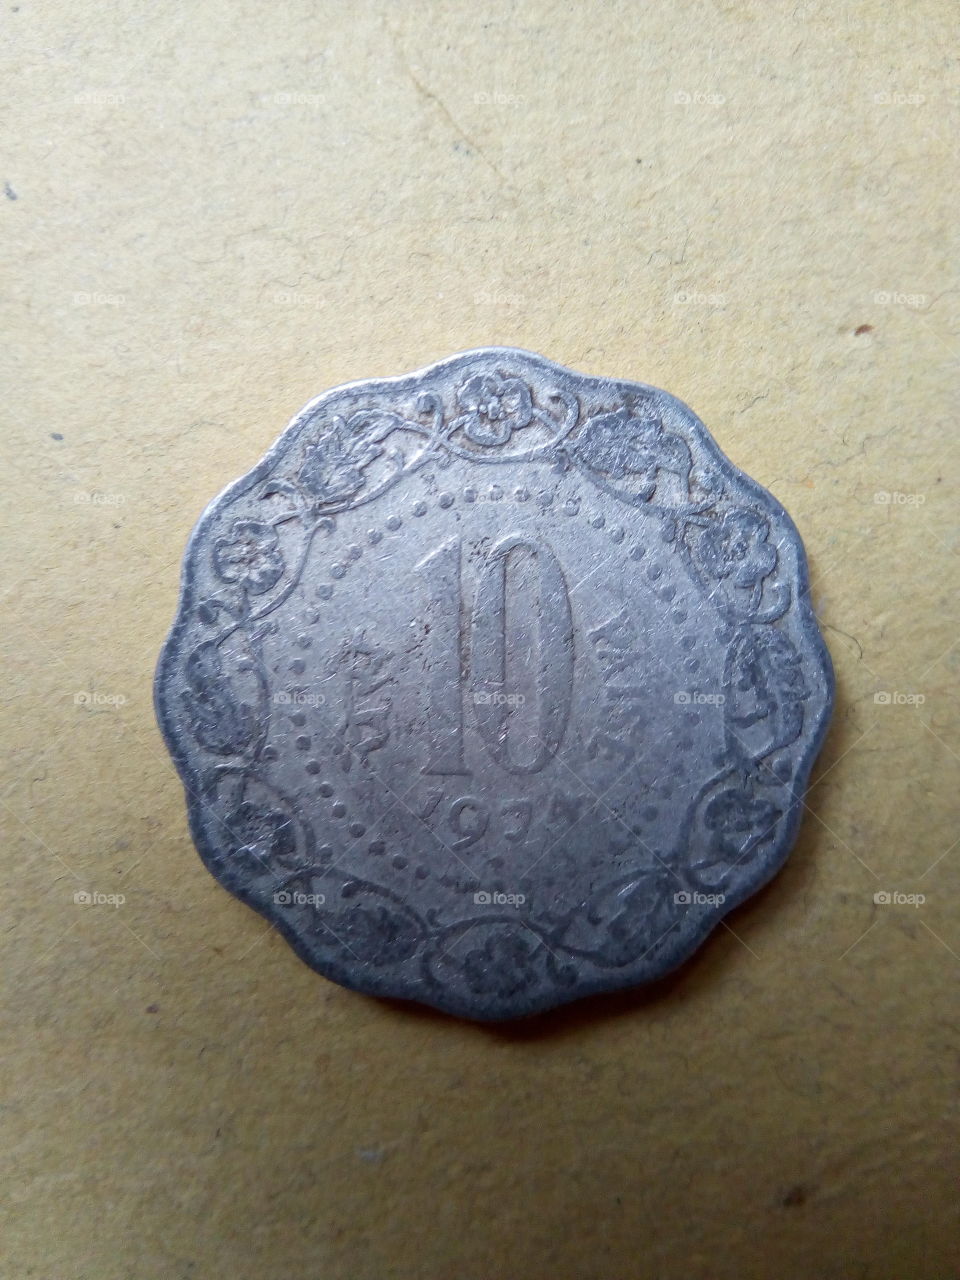 Old Indian 10 Pesa (1/10 of one Rupee) of 1974.